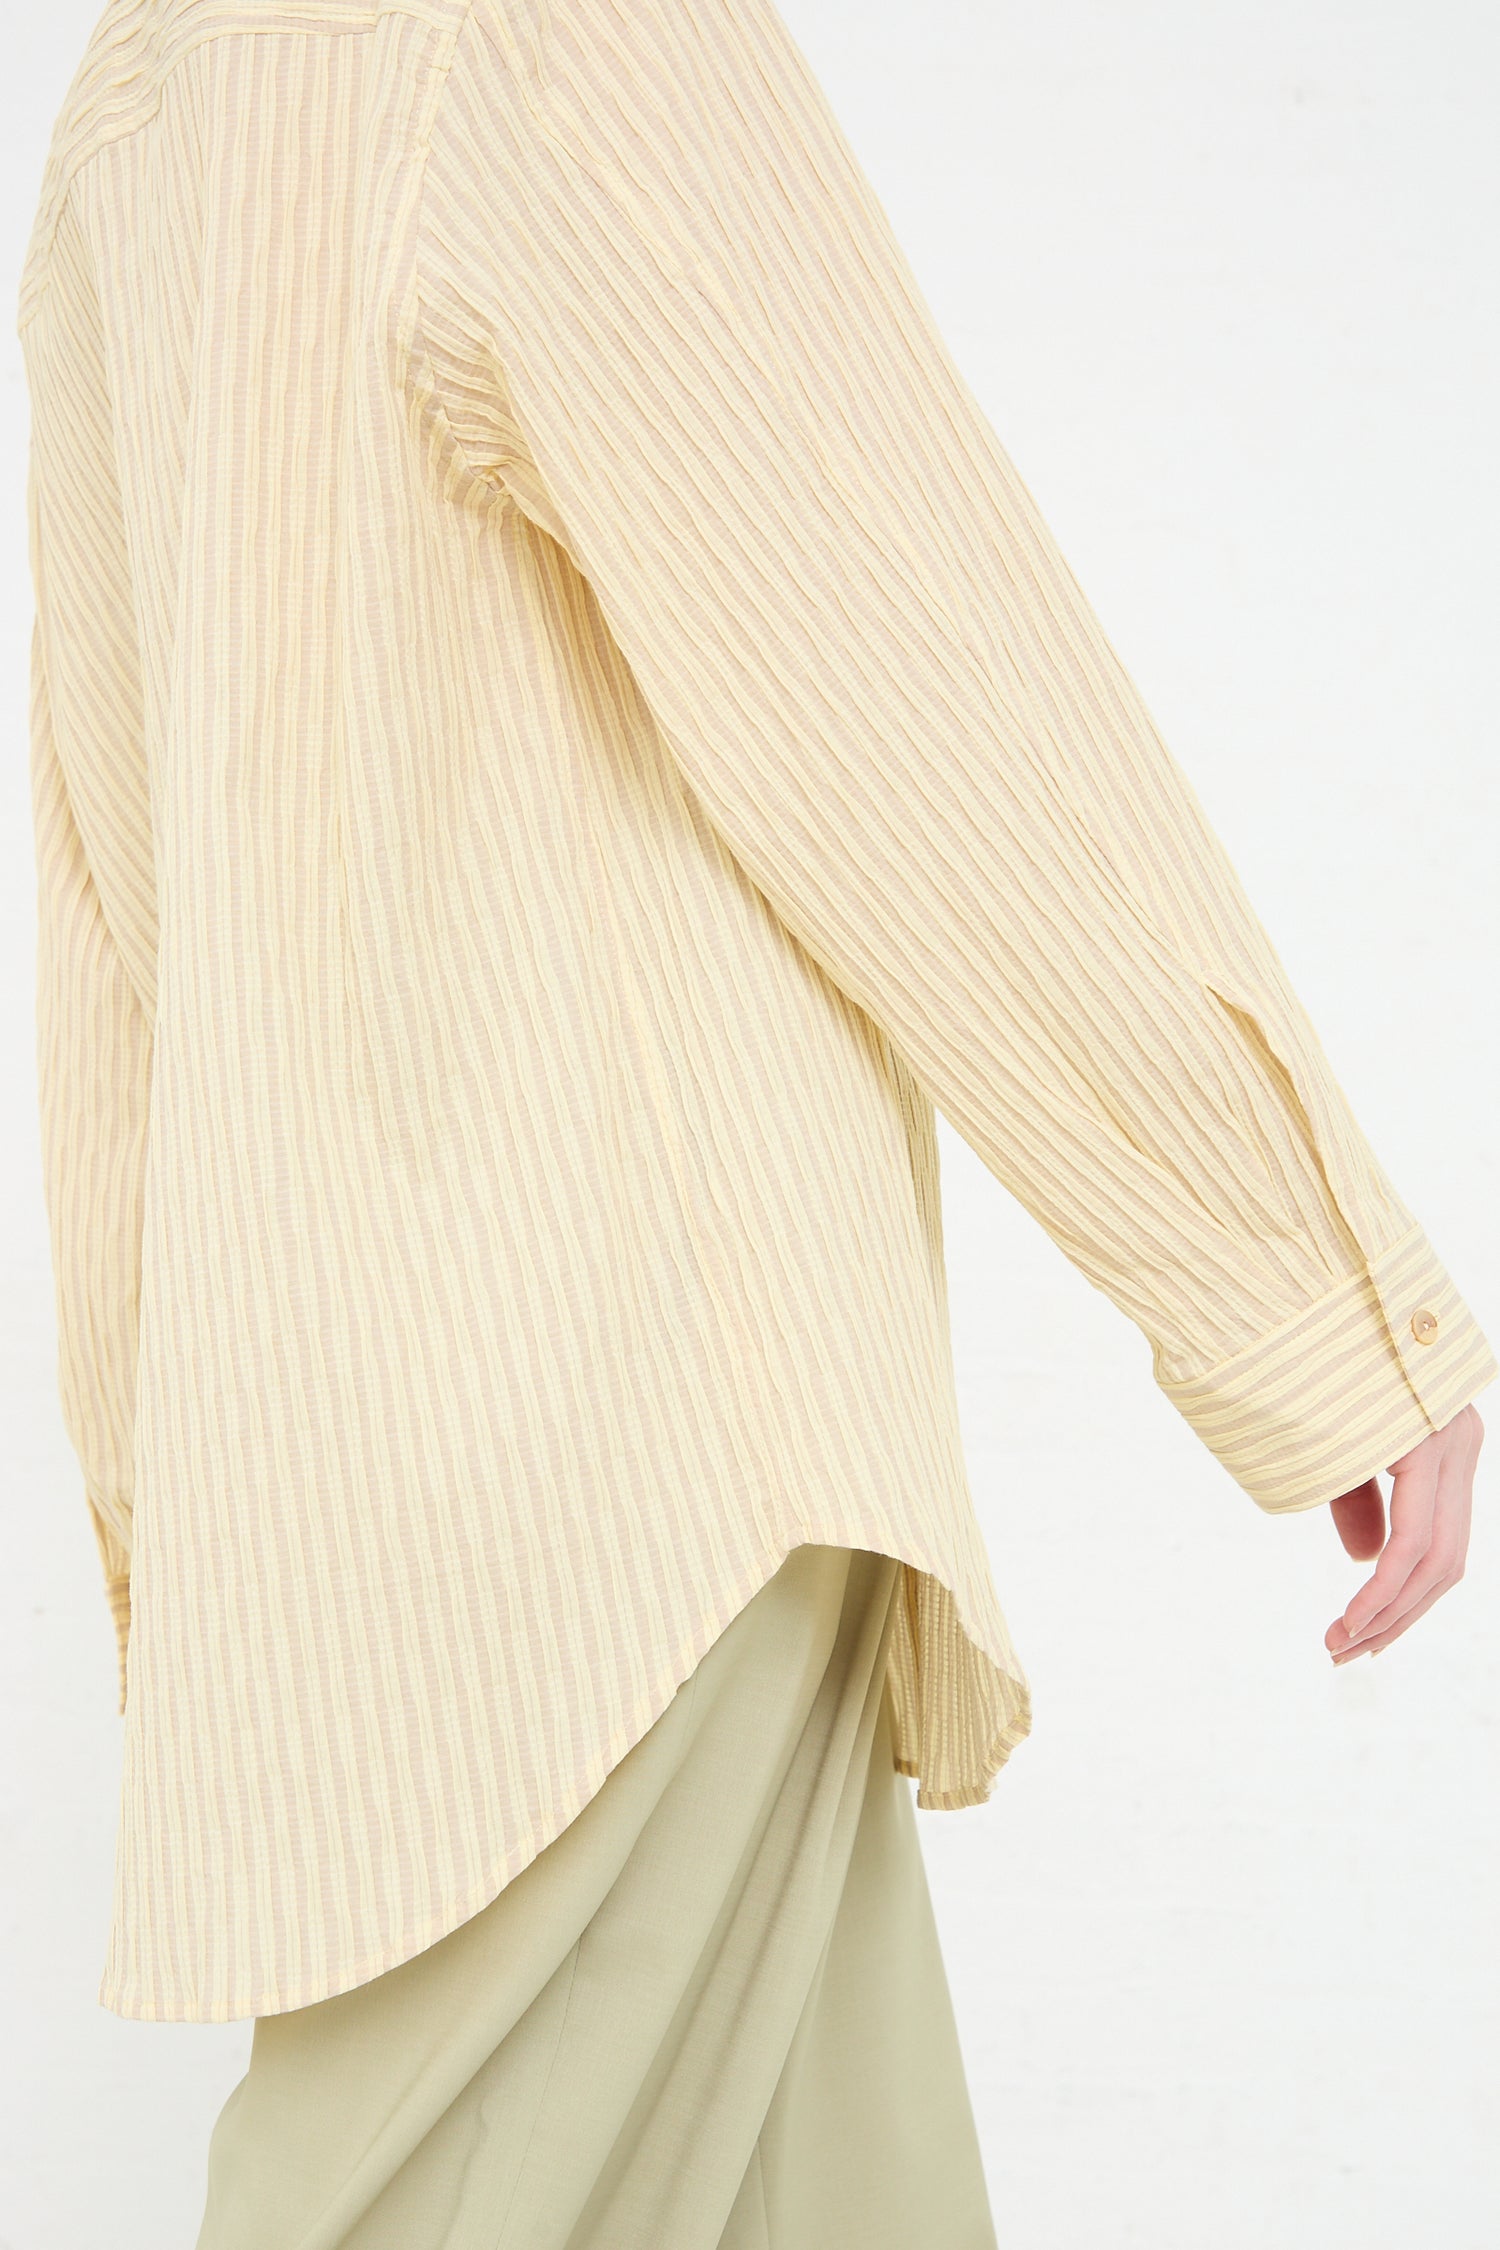 Close-up of a person wearing a Rejina Pyo Organic Cotton Seersucker Caprice Shirt in Stripe Yellow and green trousers, focusing on the fabric and style details.